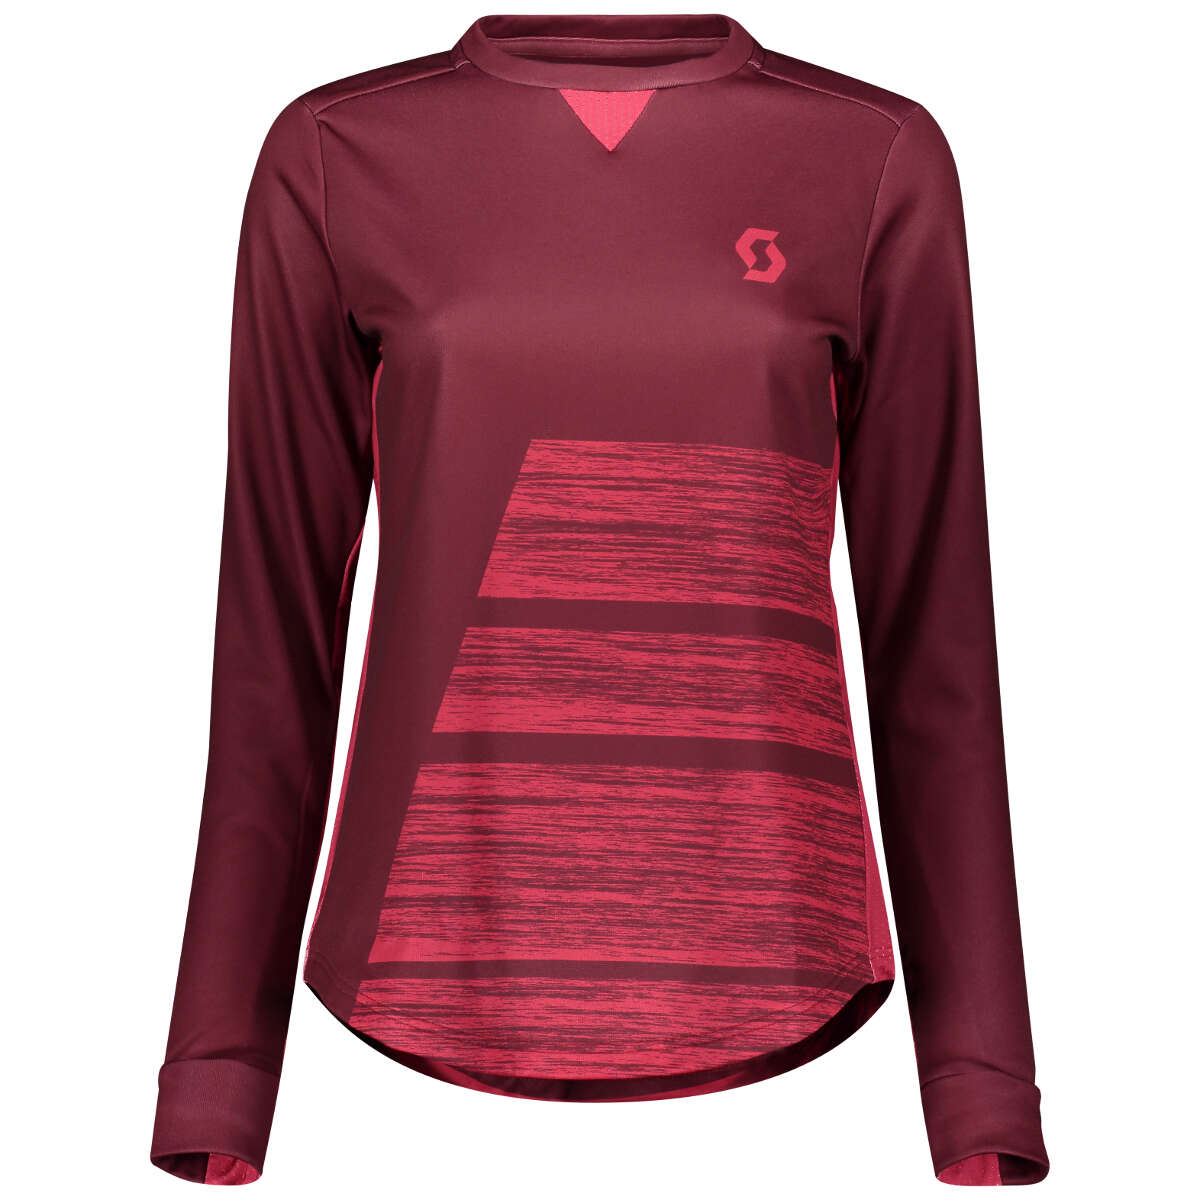 Scott Femme Maillot VTT Manches Longues Trail AS Mahogany Red/Ruby Red